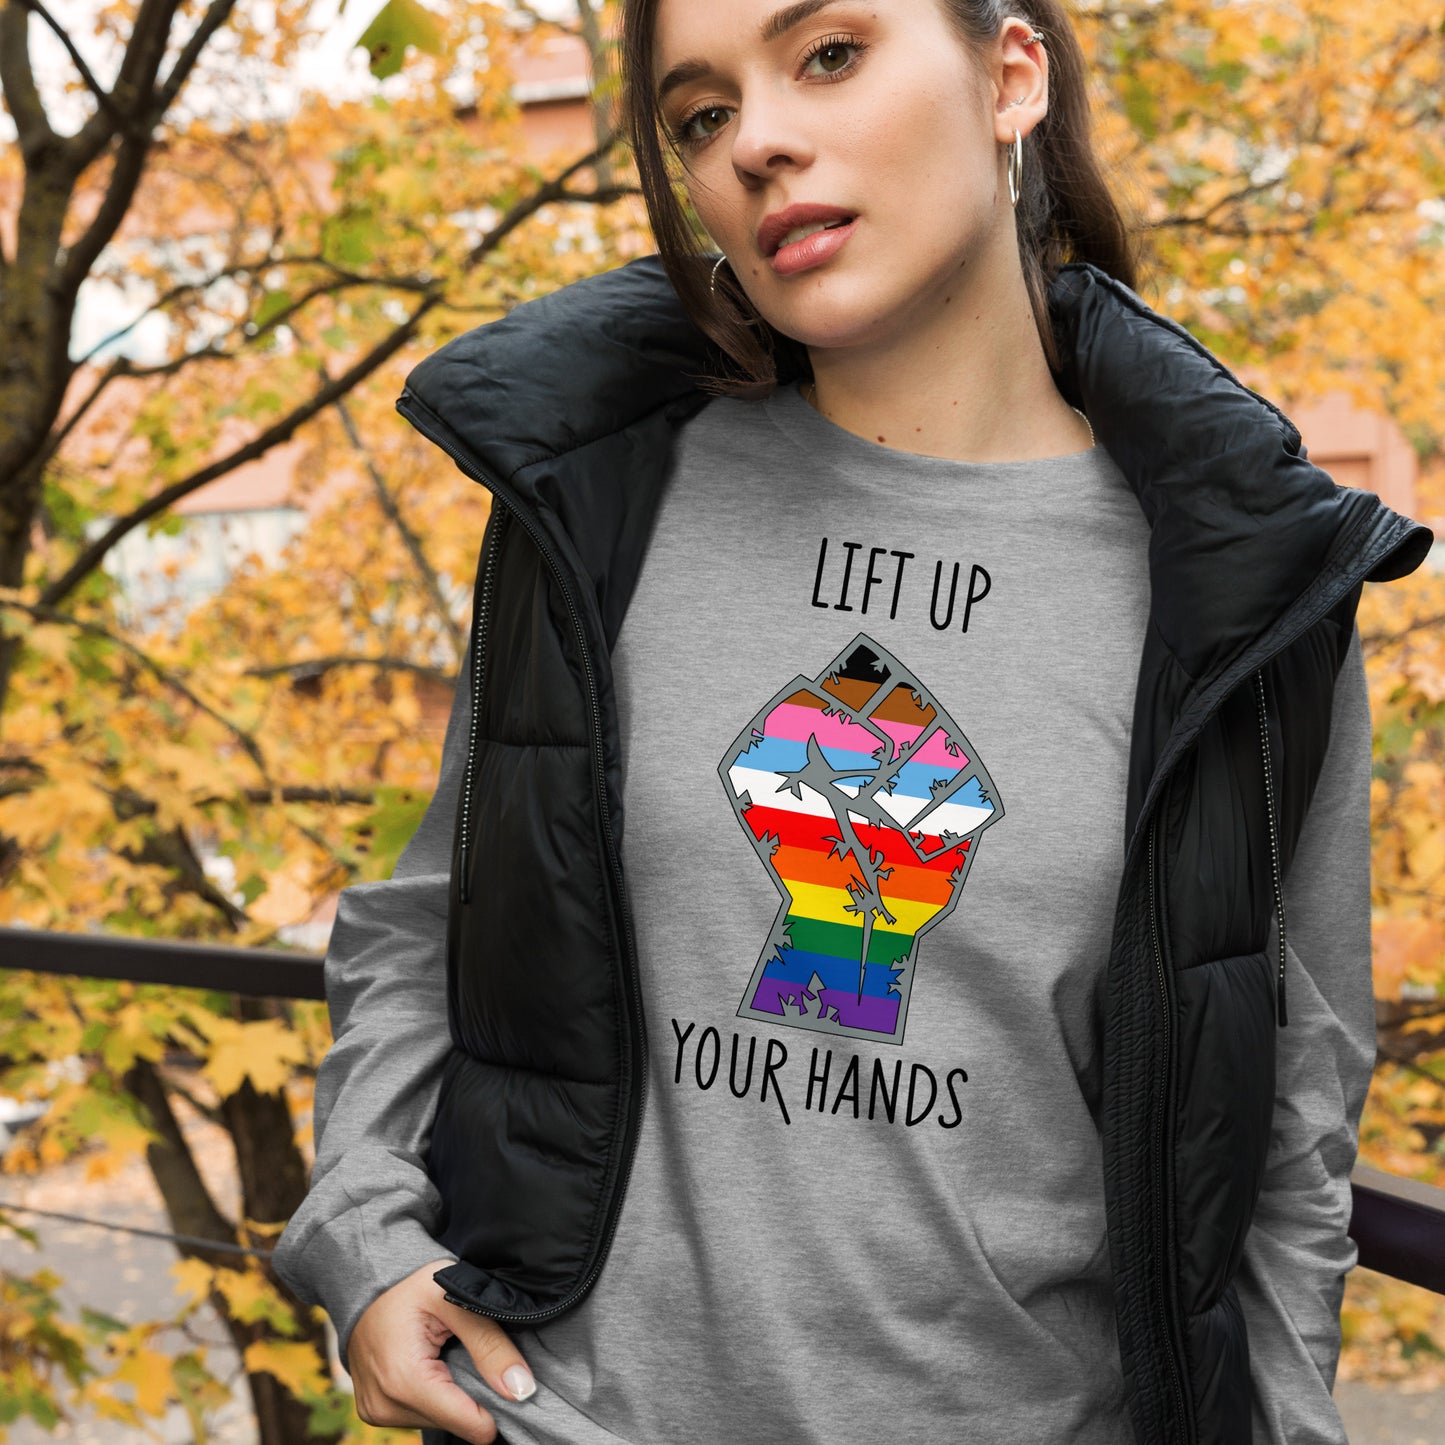 Lift Up Your Hands unisex long sleeve tee